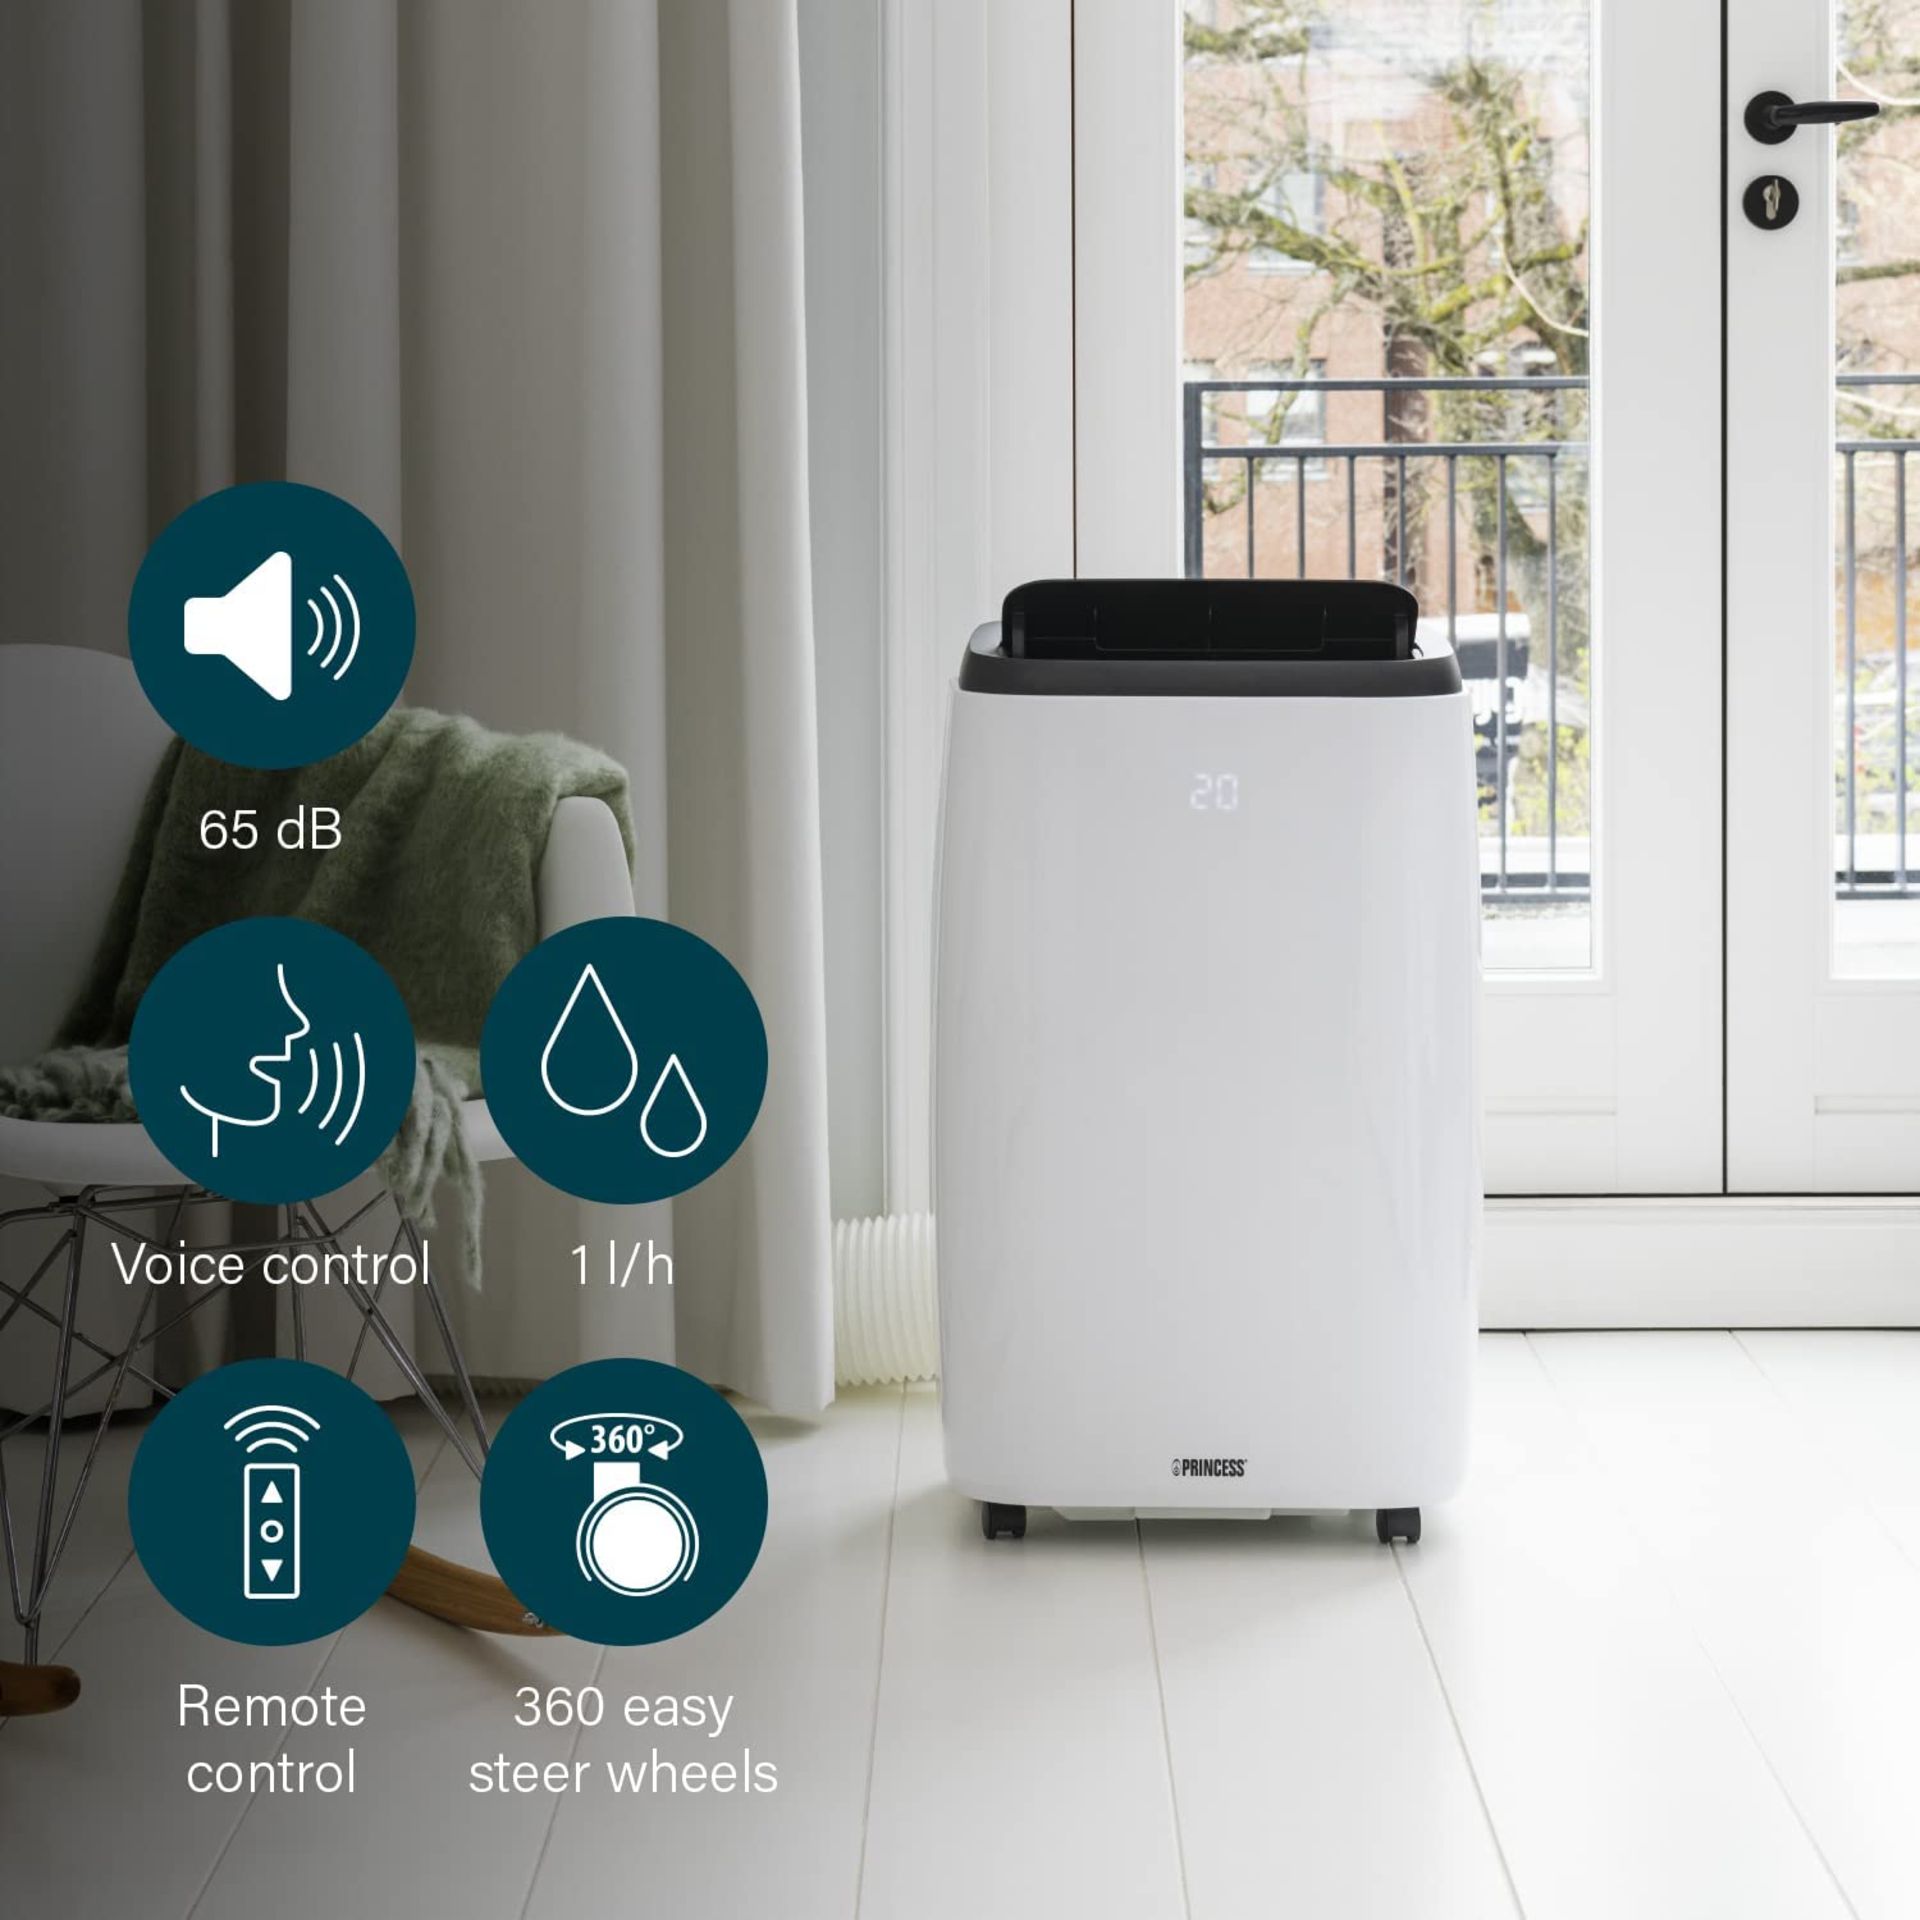 Princess Mobile Air Conditioner. 3 IN 1 SMART WIFI. 12,000 BTU, Smart and Voice Control, 3.5 kW, - Image 3 of 3